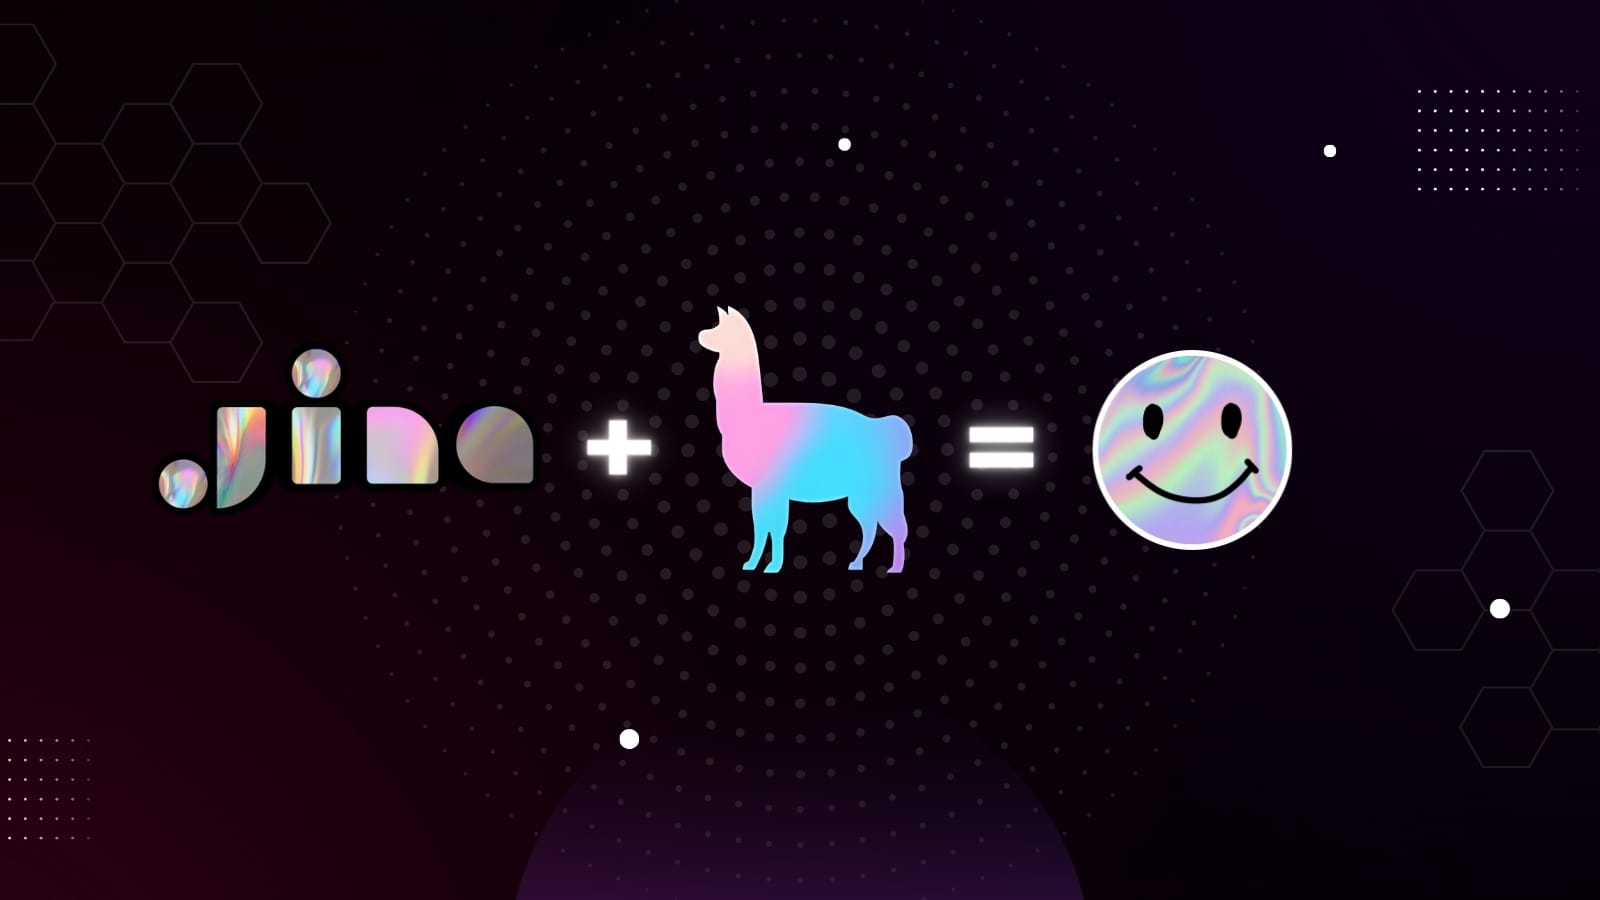 Black and dark purple hexagon-patterned background with central icons including a llama and emoticons, flanked by technology 